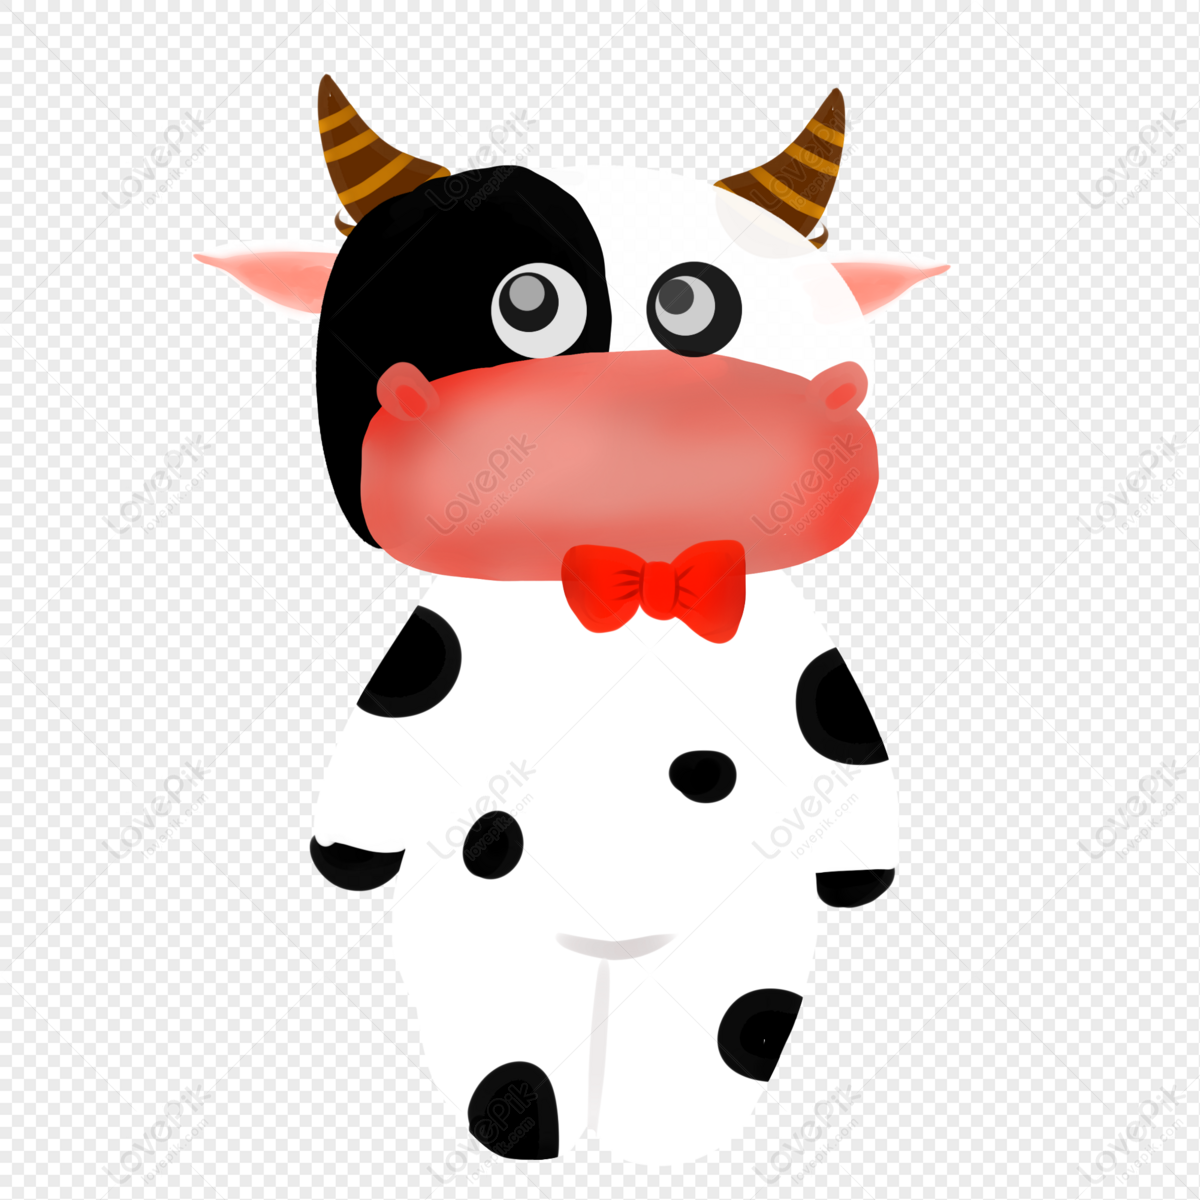 Cow Tie Bow Tie Free PNG And Clipart Image For Free Download - Lovepik |  401287249